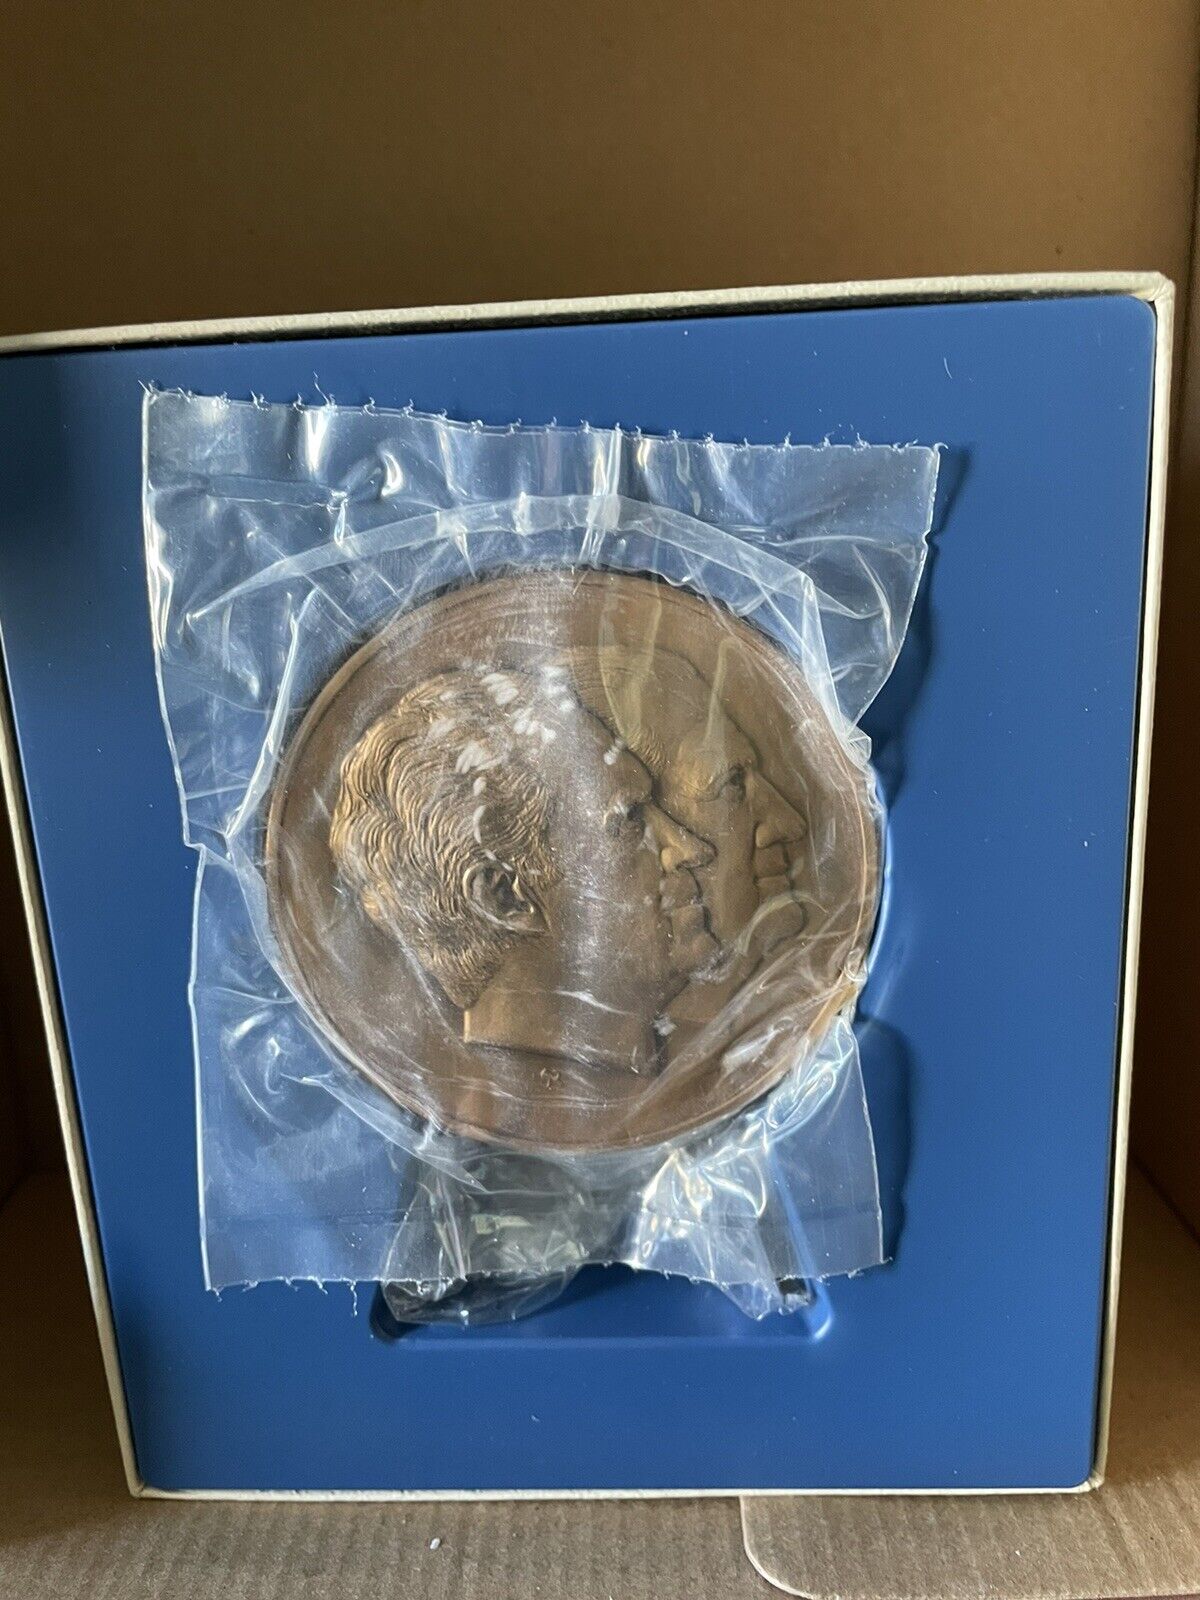 SEALED The Official 1973 Inaugural Medal Richard Nixon and Spiro Agnew Bronze